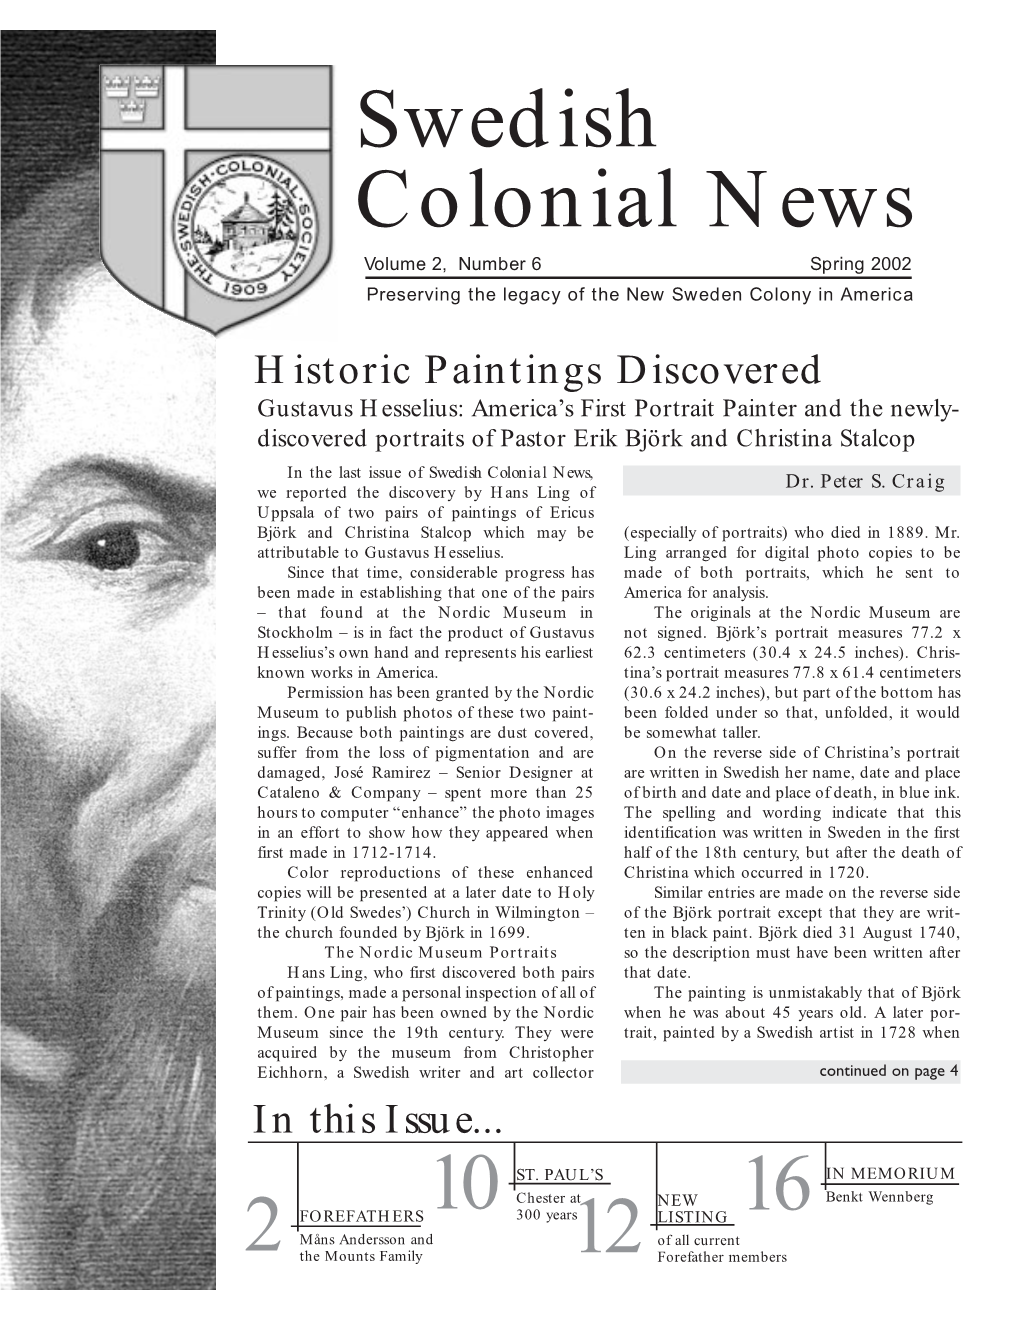 Swedish Colonial News Volume 2, Number 6 Spring 2002 Preserving the Legacy of the New Sweden Colony in America